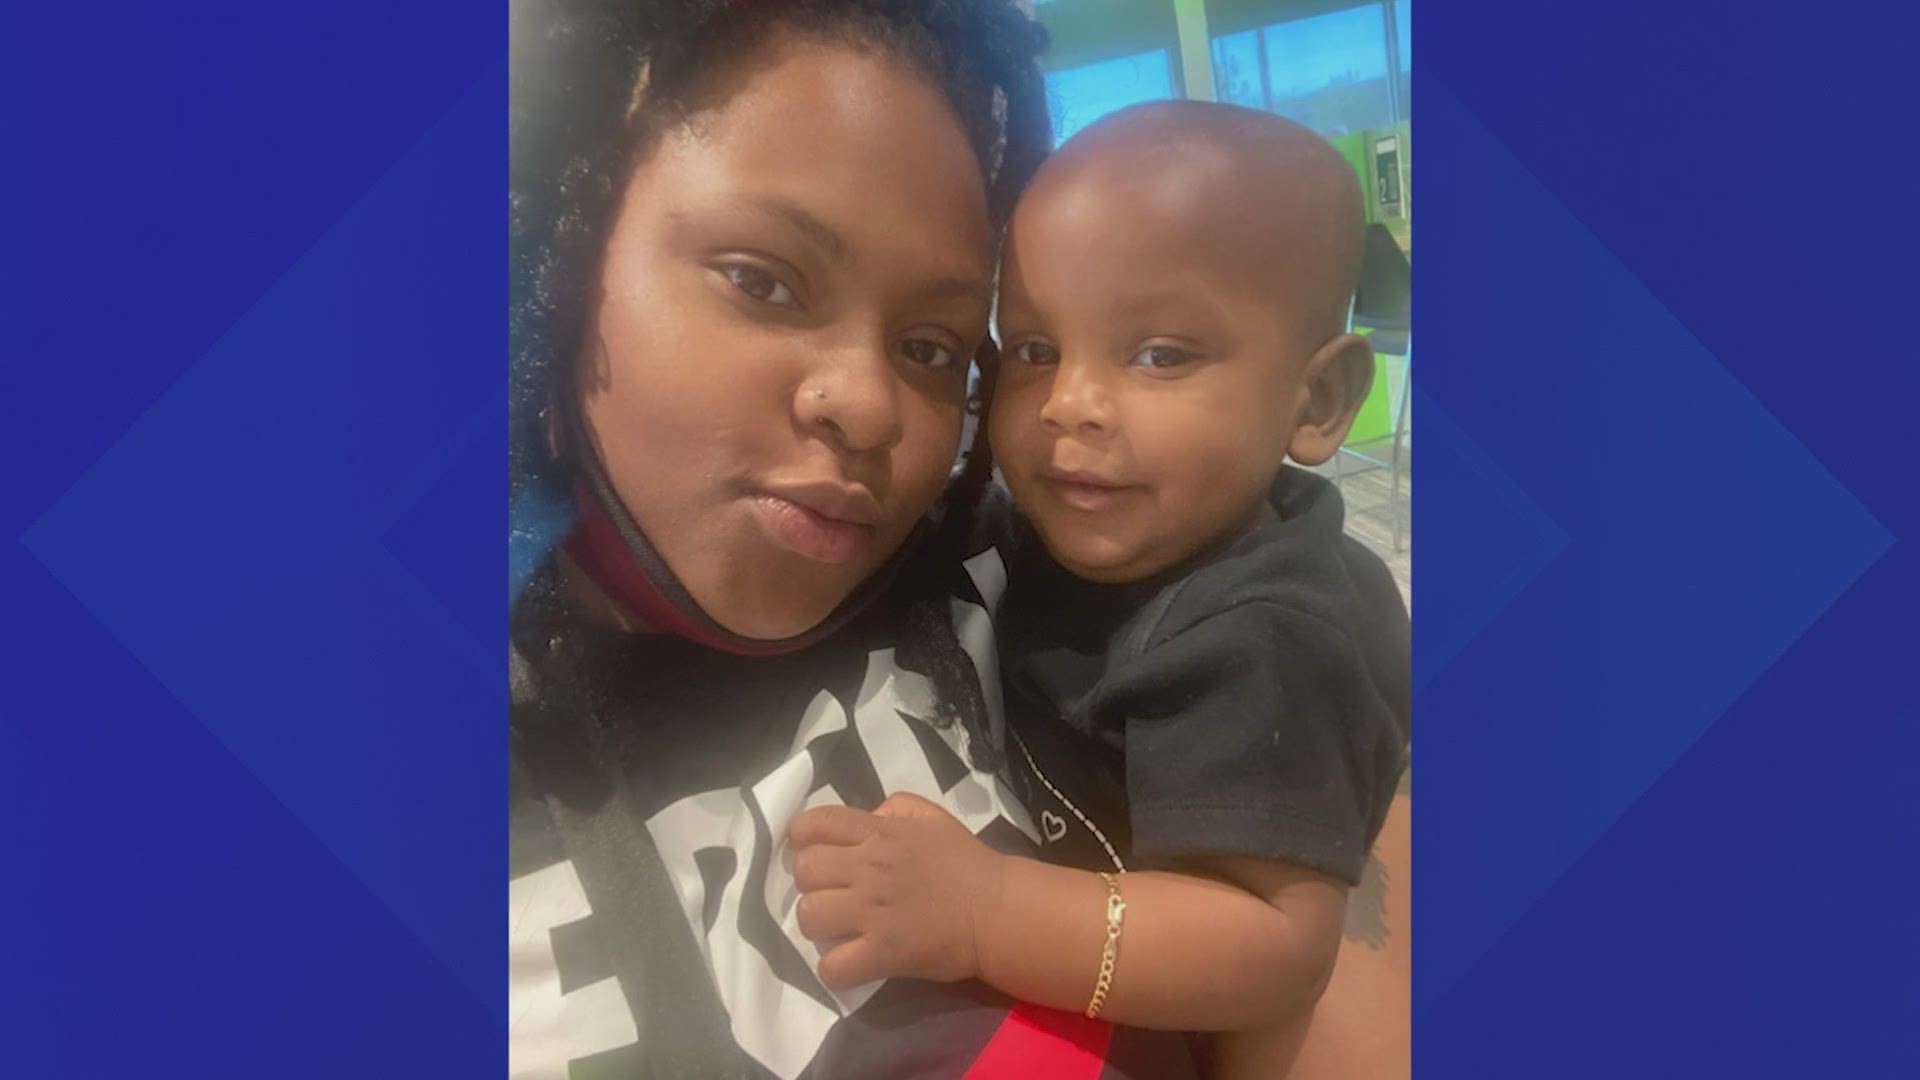 A 1-year-old boy shot on his birthday is now recovering in the hospital, but his mother who was holding him was killed.